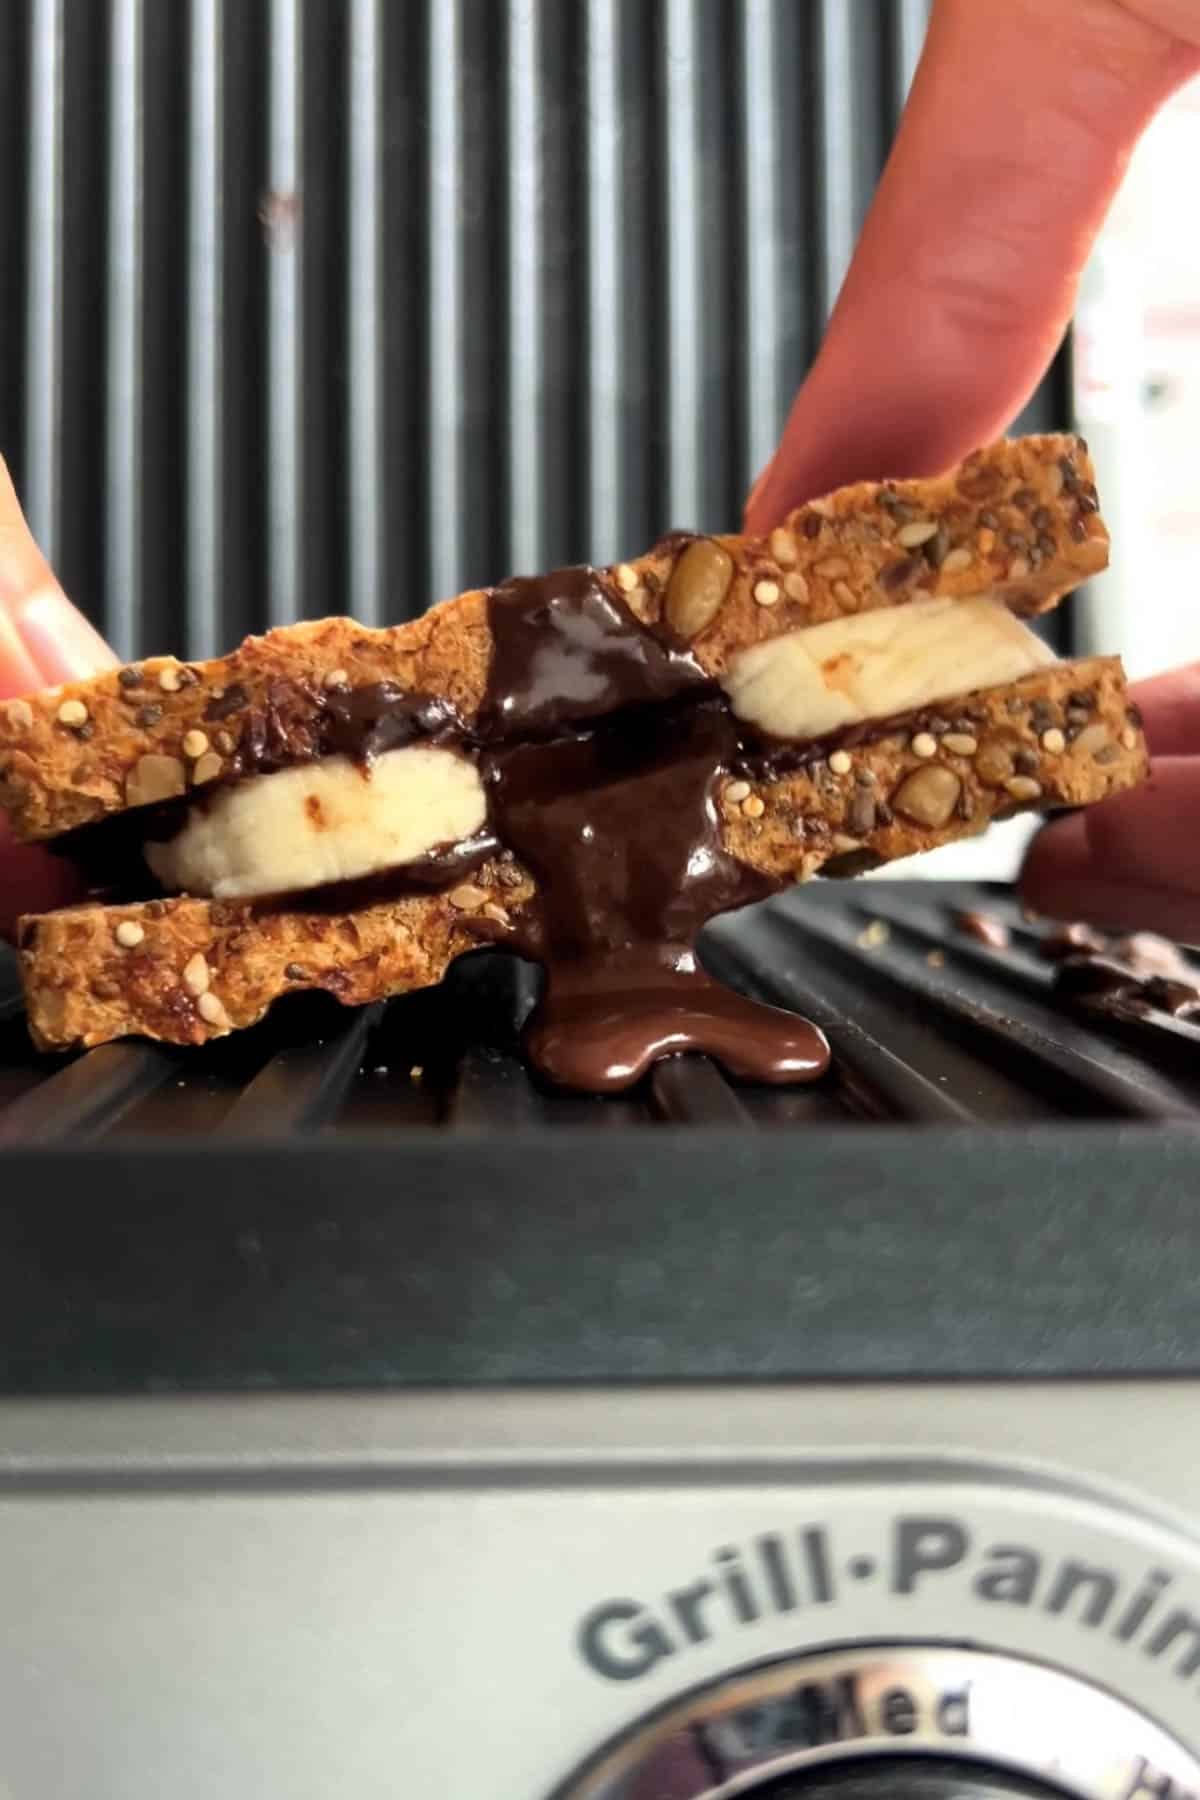 Chocolate spread in a sandwich with banana in a panini press.